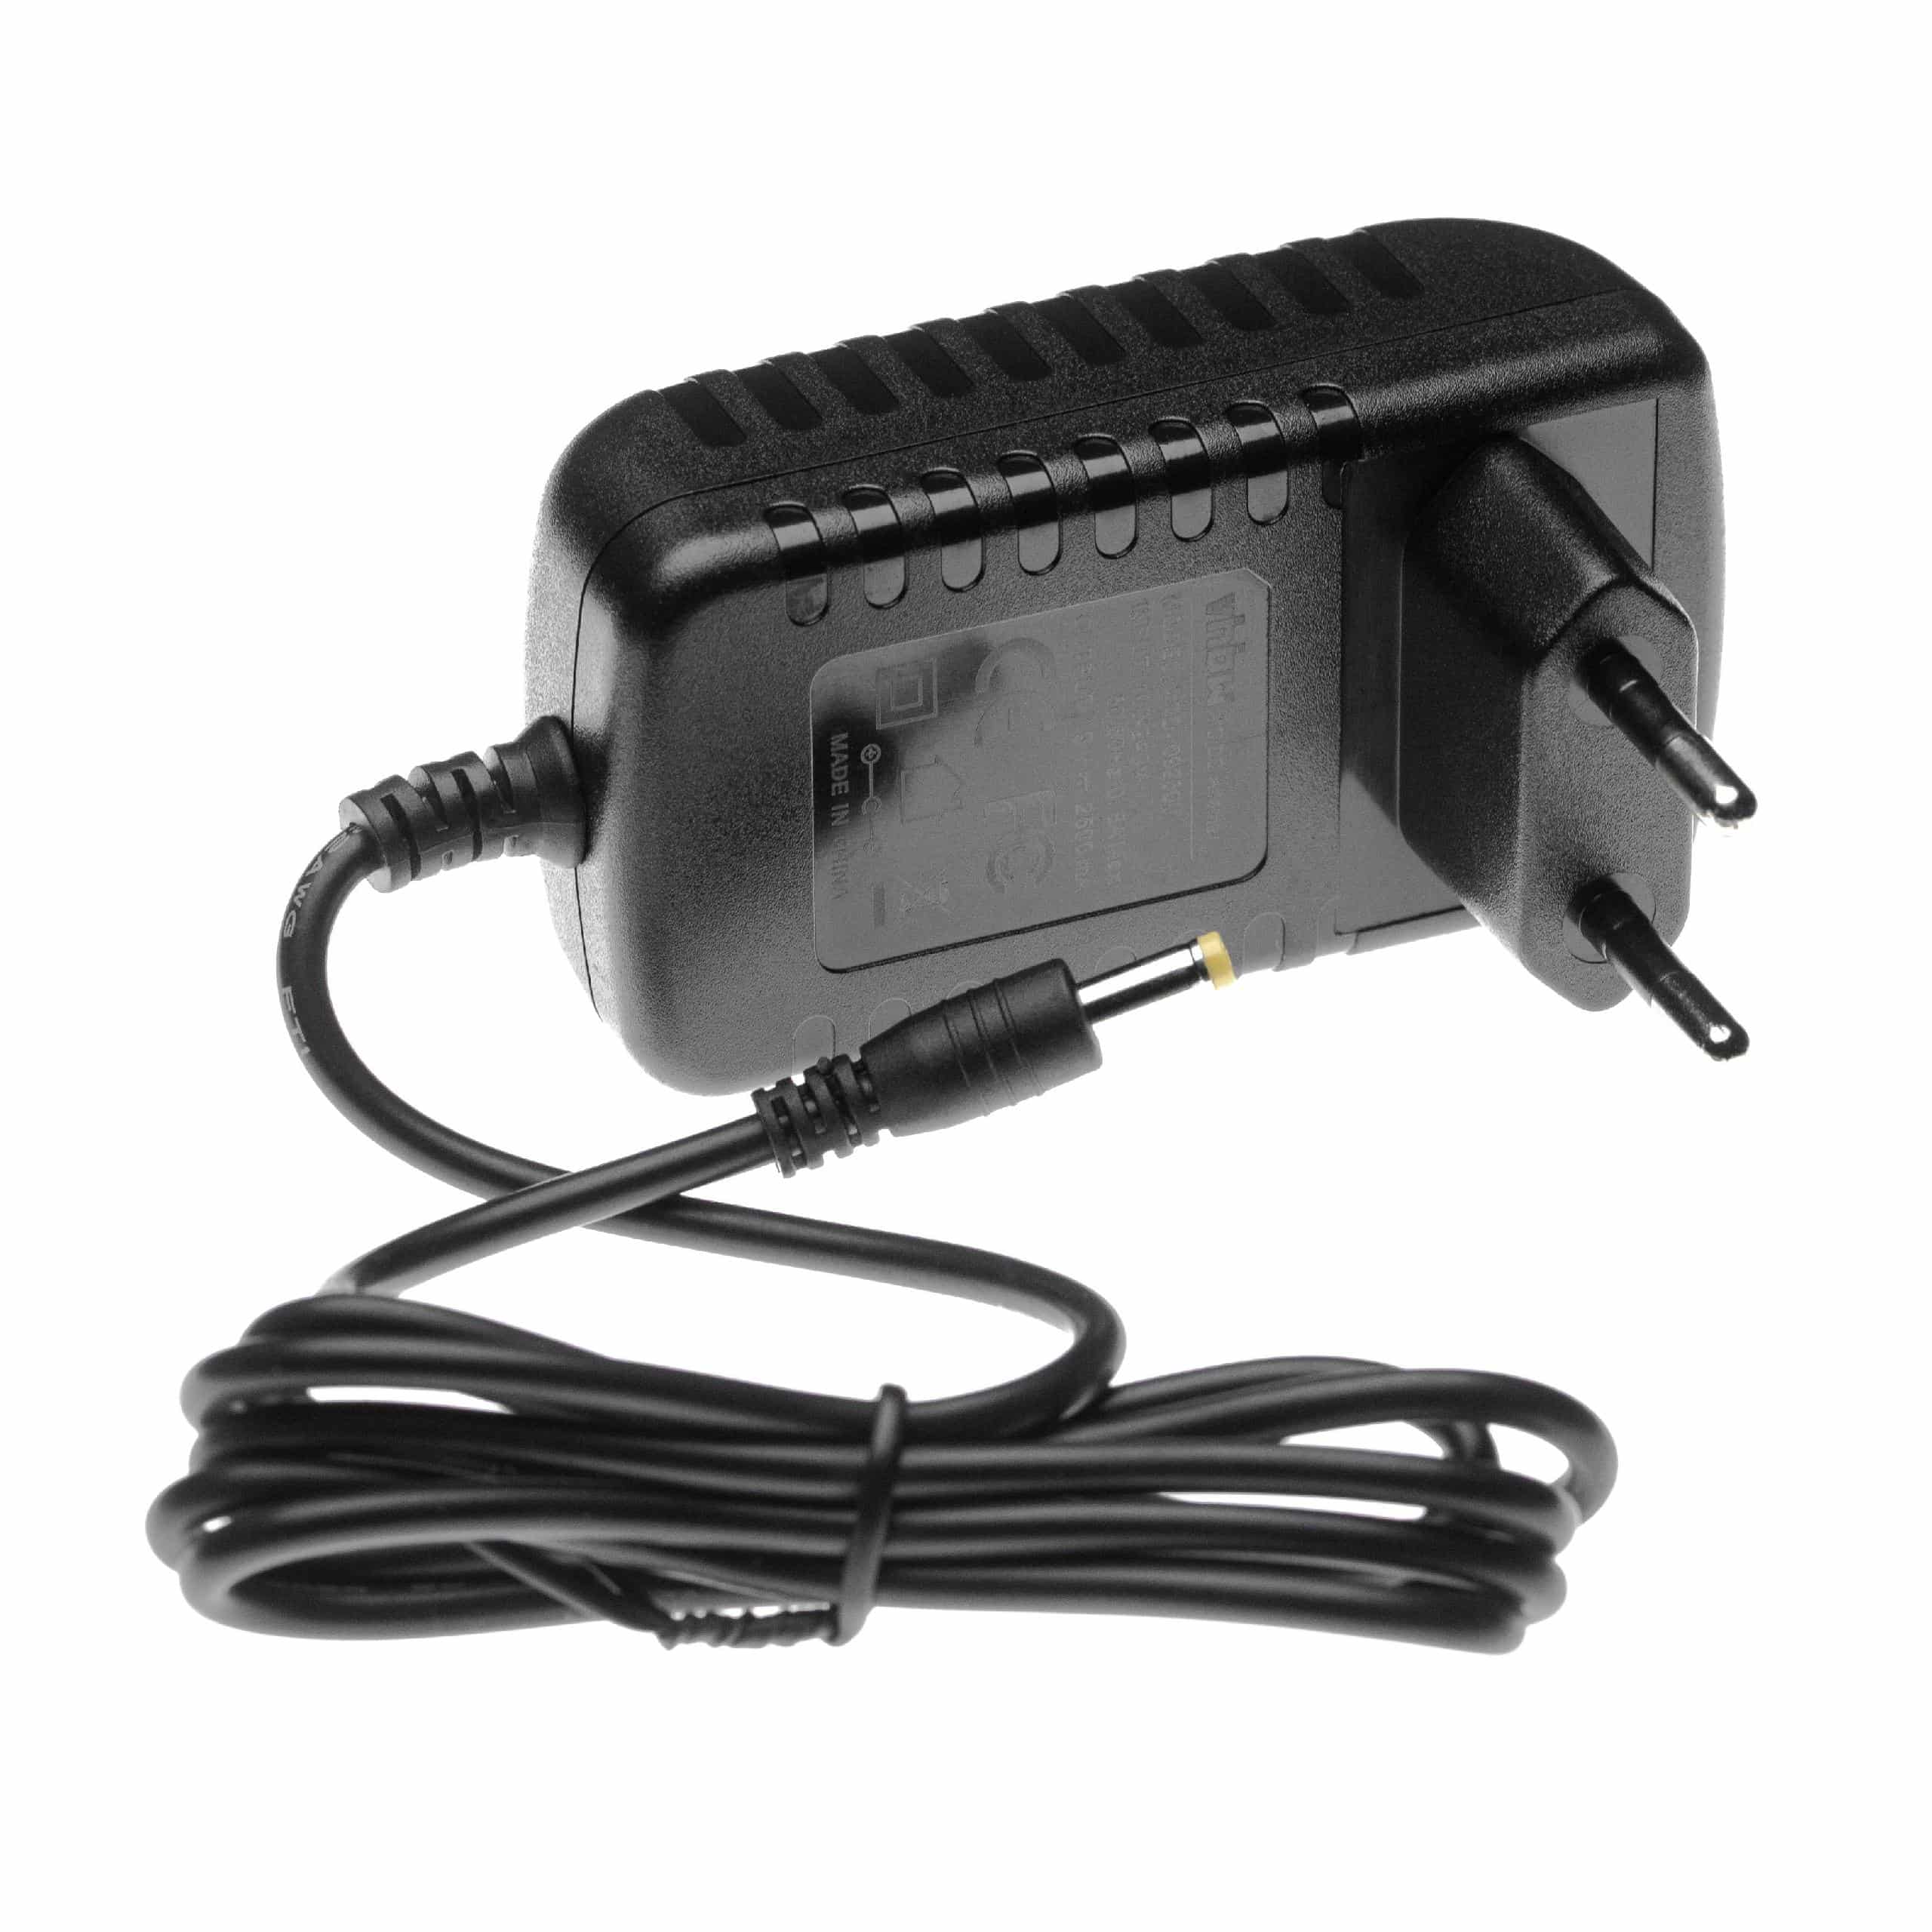 Mains Power Adapter replaces MyVolts CC252MU for Technics Keyboard, E-Piano - 114 cm